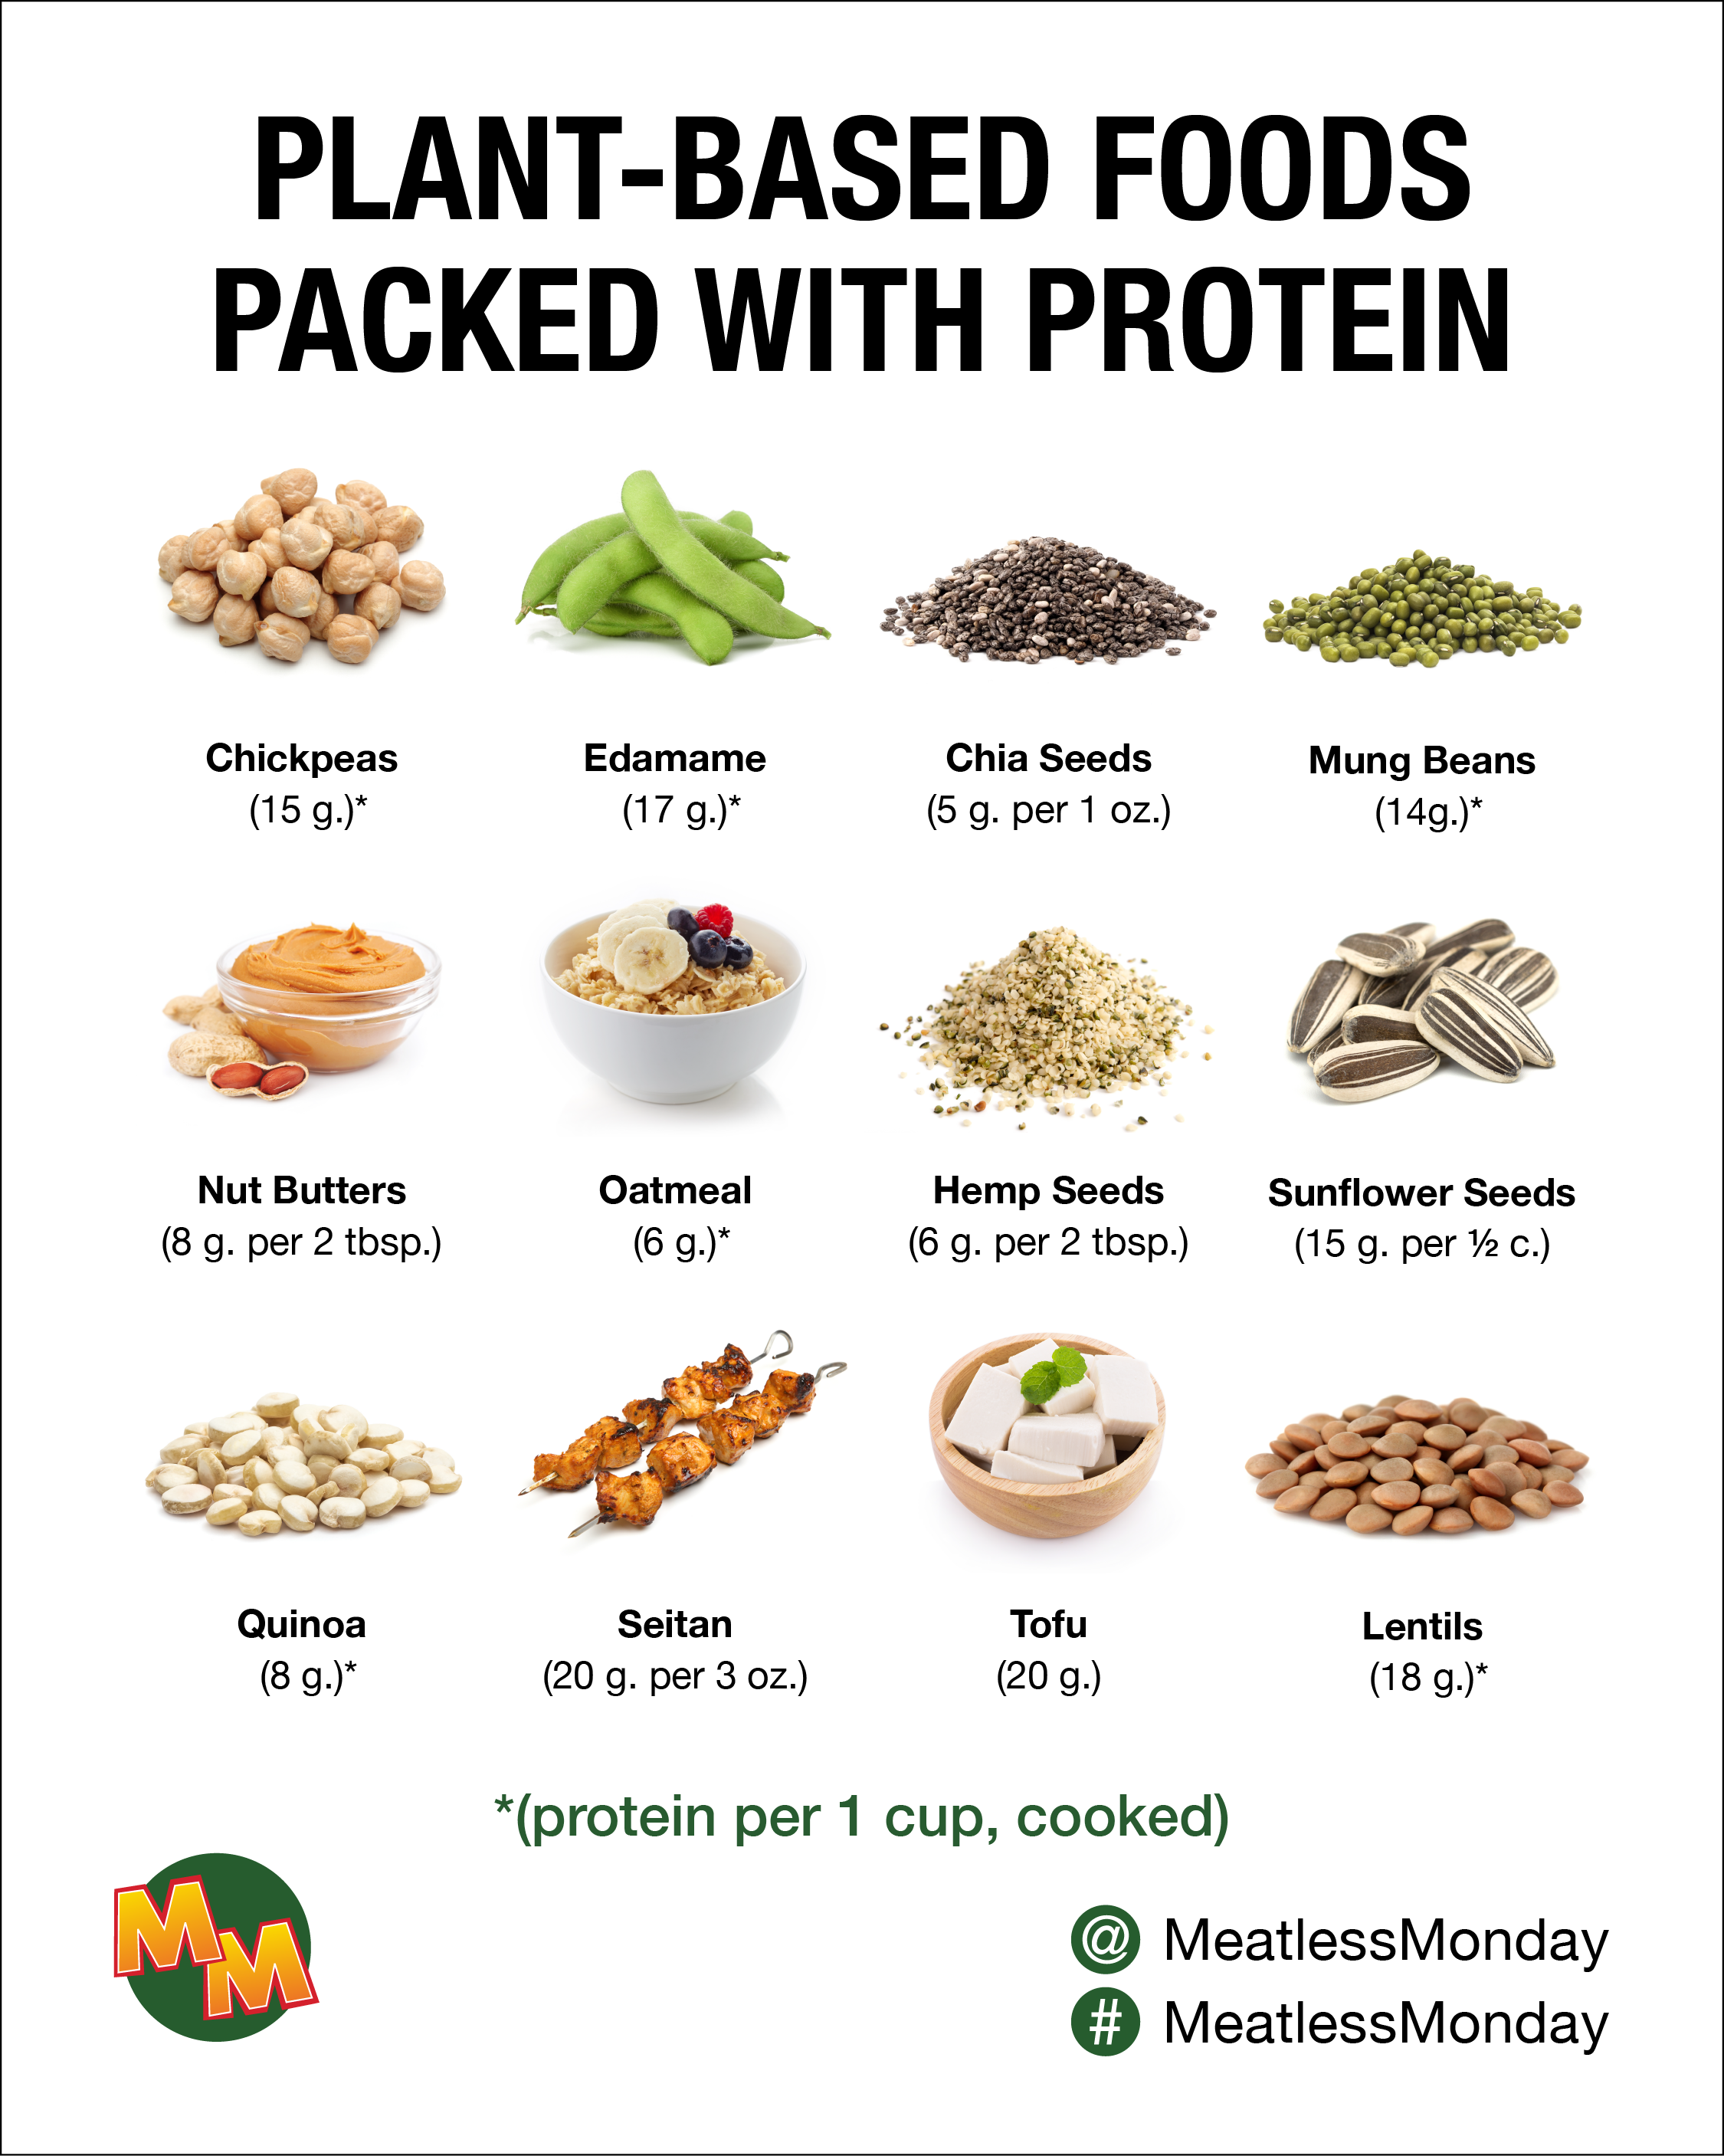 Plant-based foods packed with protein